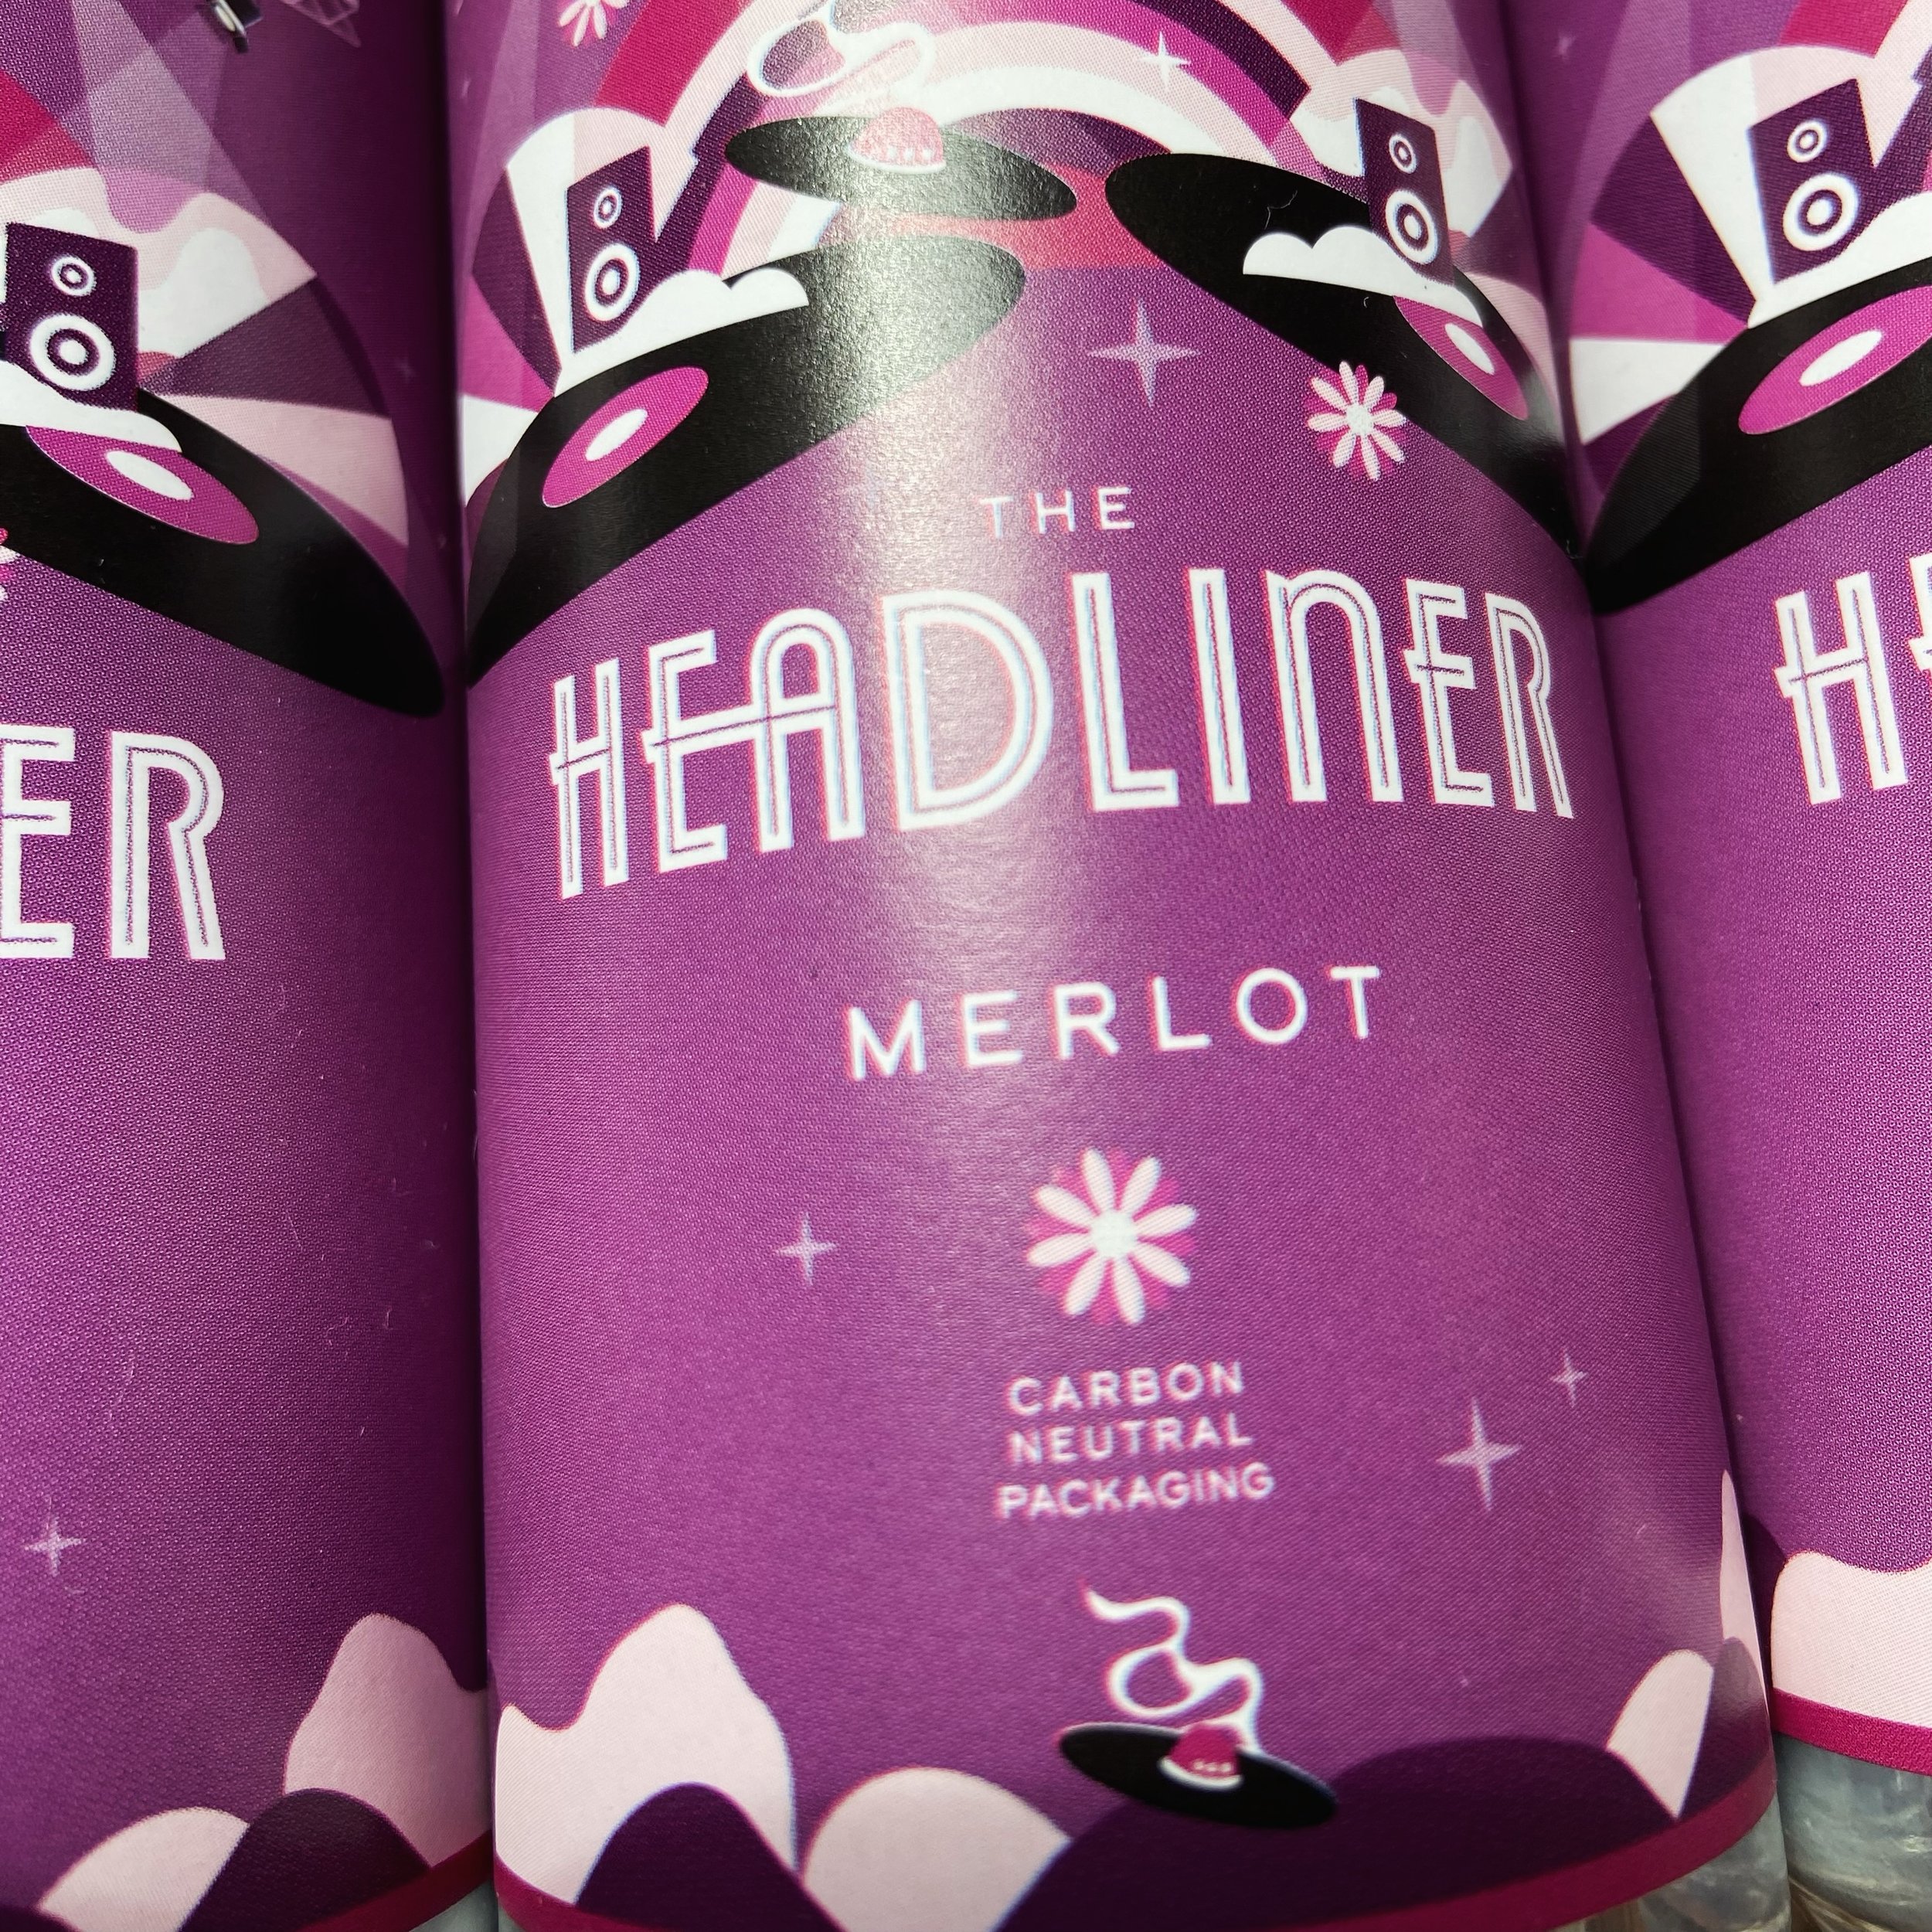 With ripe bramble and hints of smoky strawberry fruit, The Headliner Merlot has a satin-textured concentration about it. Soft and approachable, there&rsquo;s elegant weight of fruit and an appealing balance of sweet tannins on the finish, which is lo